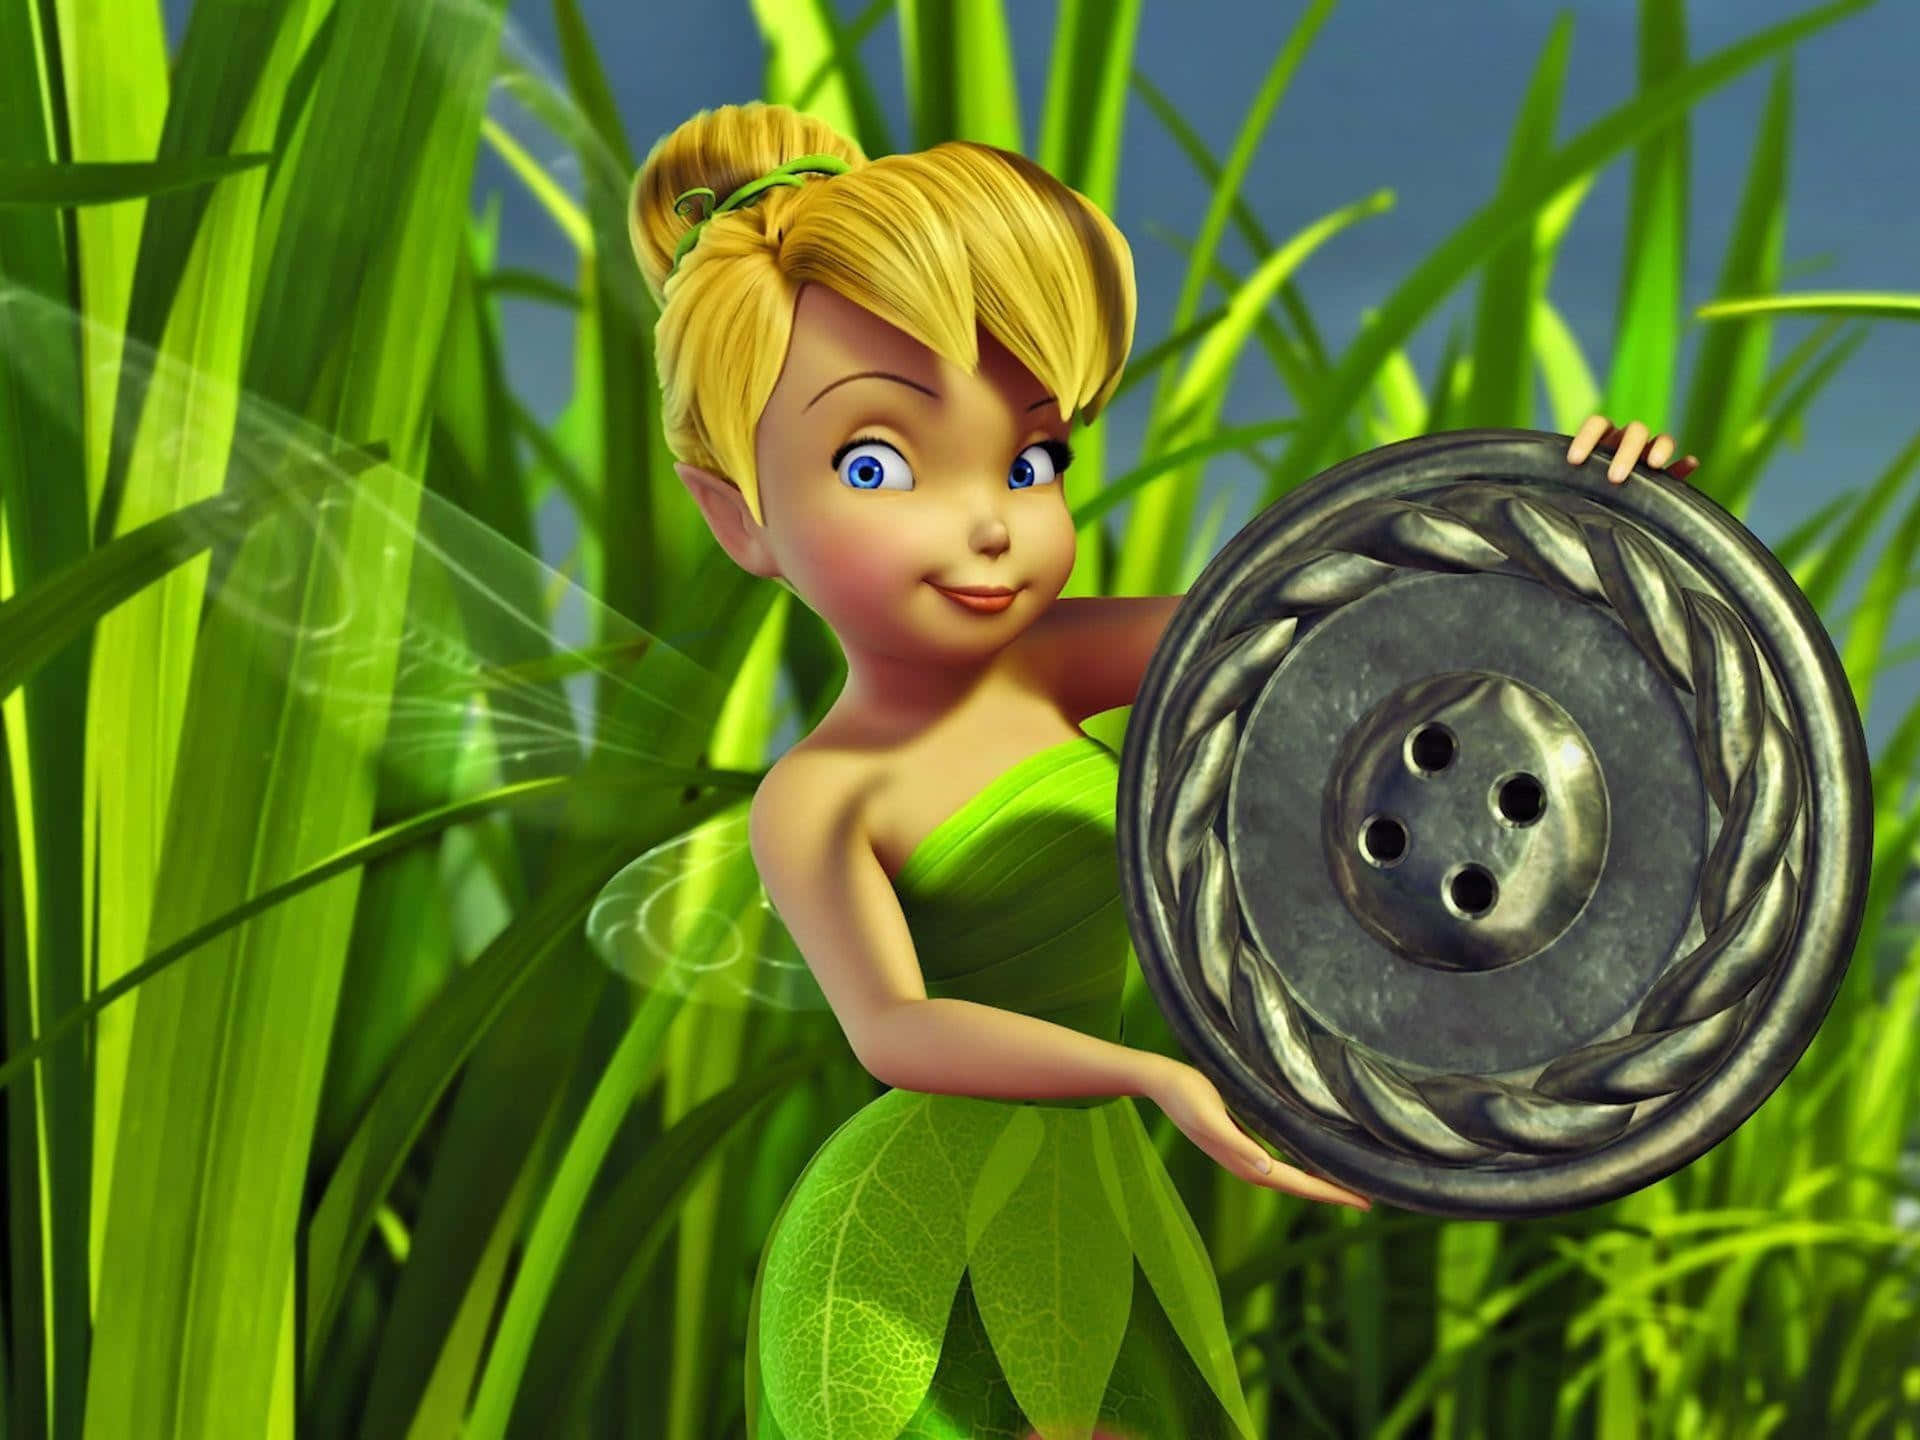 Live your own magical story with Tinkerbell